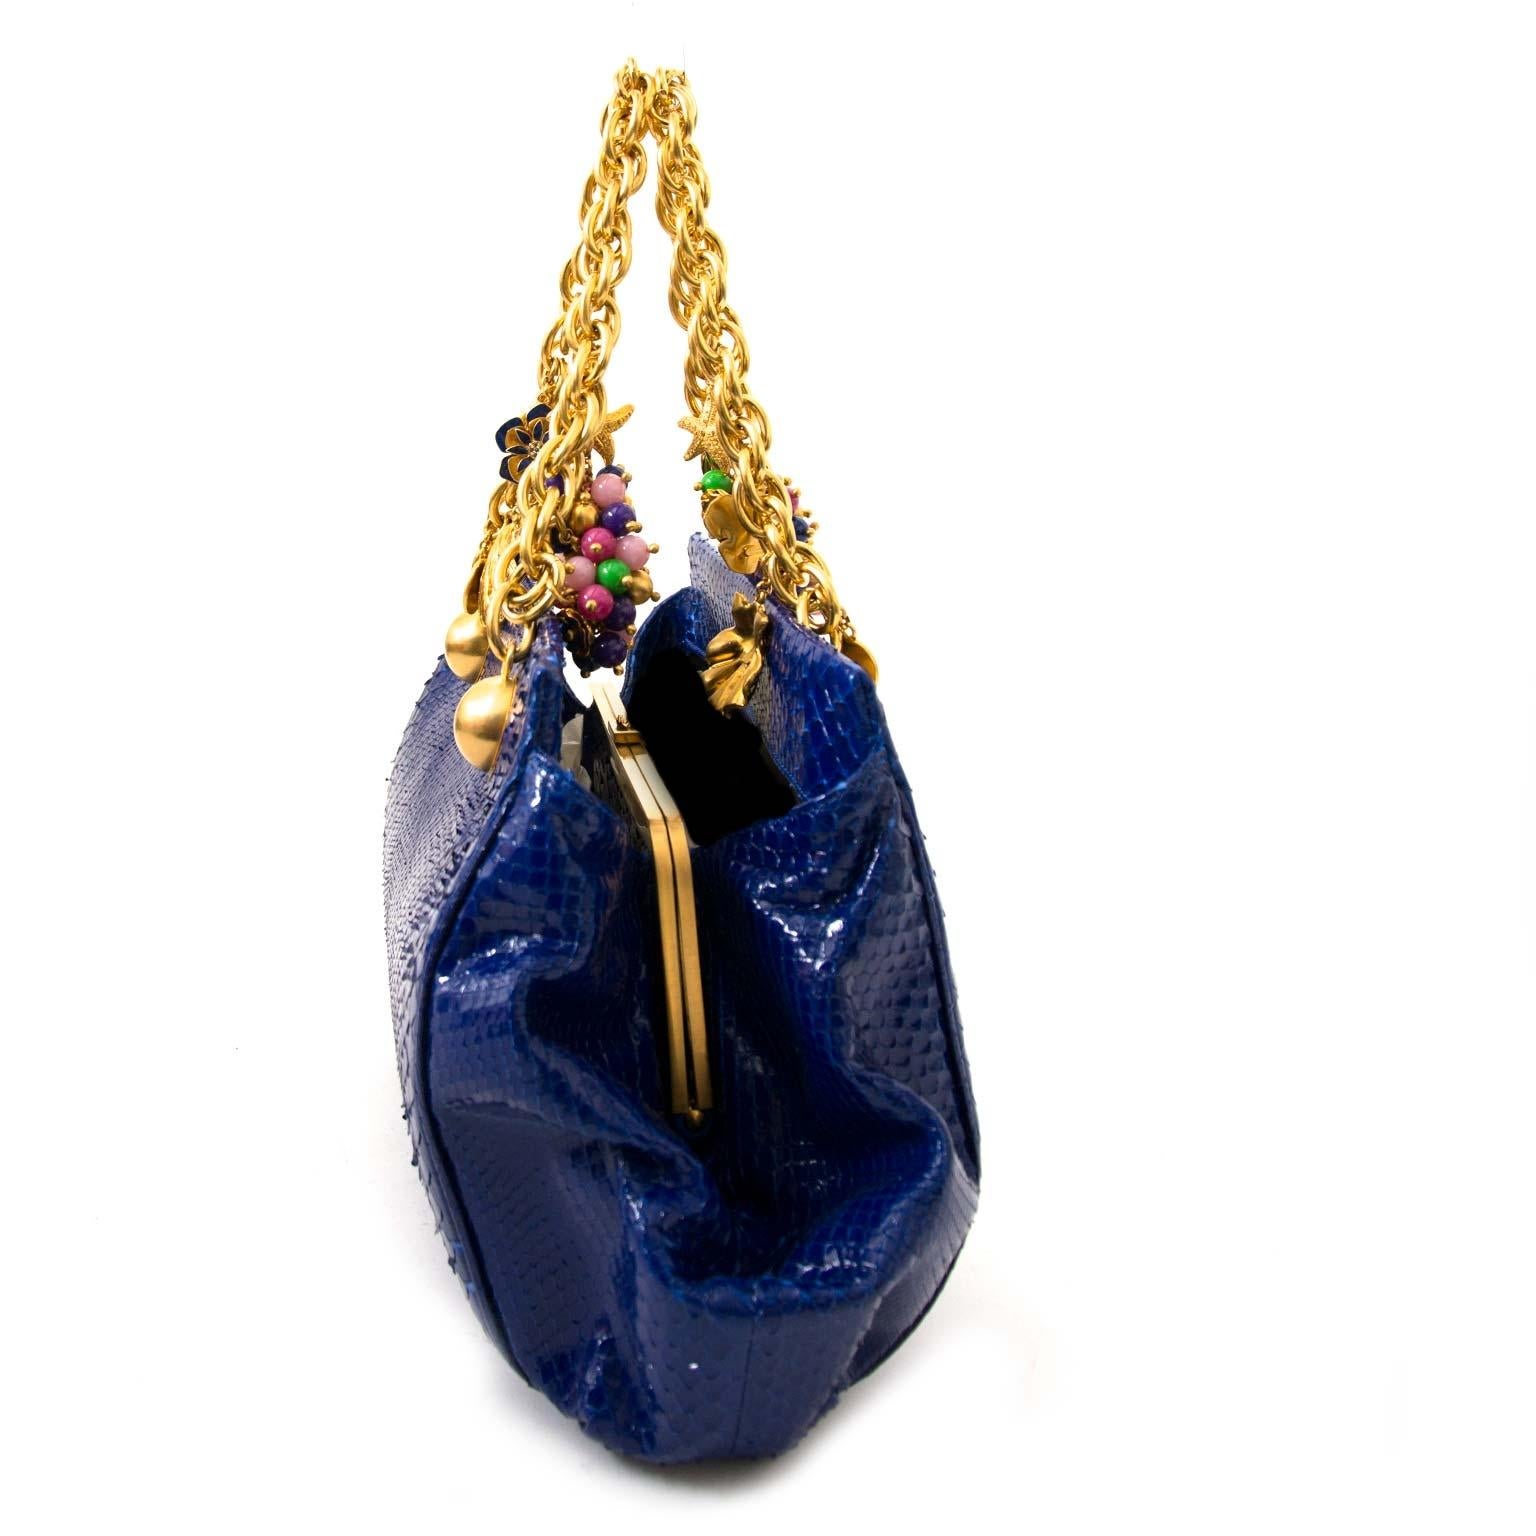 Black Versace Blue Python Gold Chain Bag With Ornaments